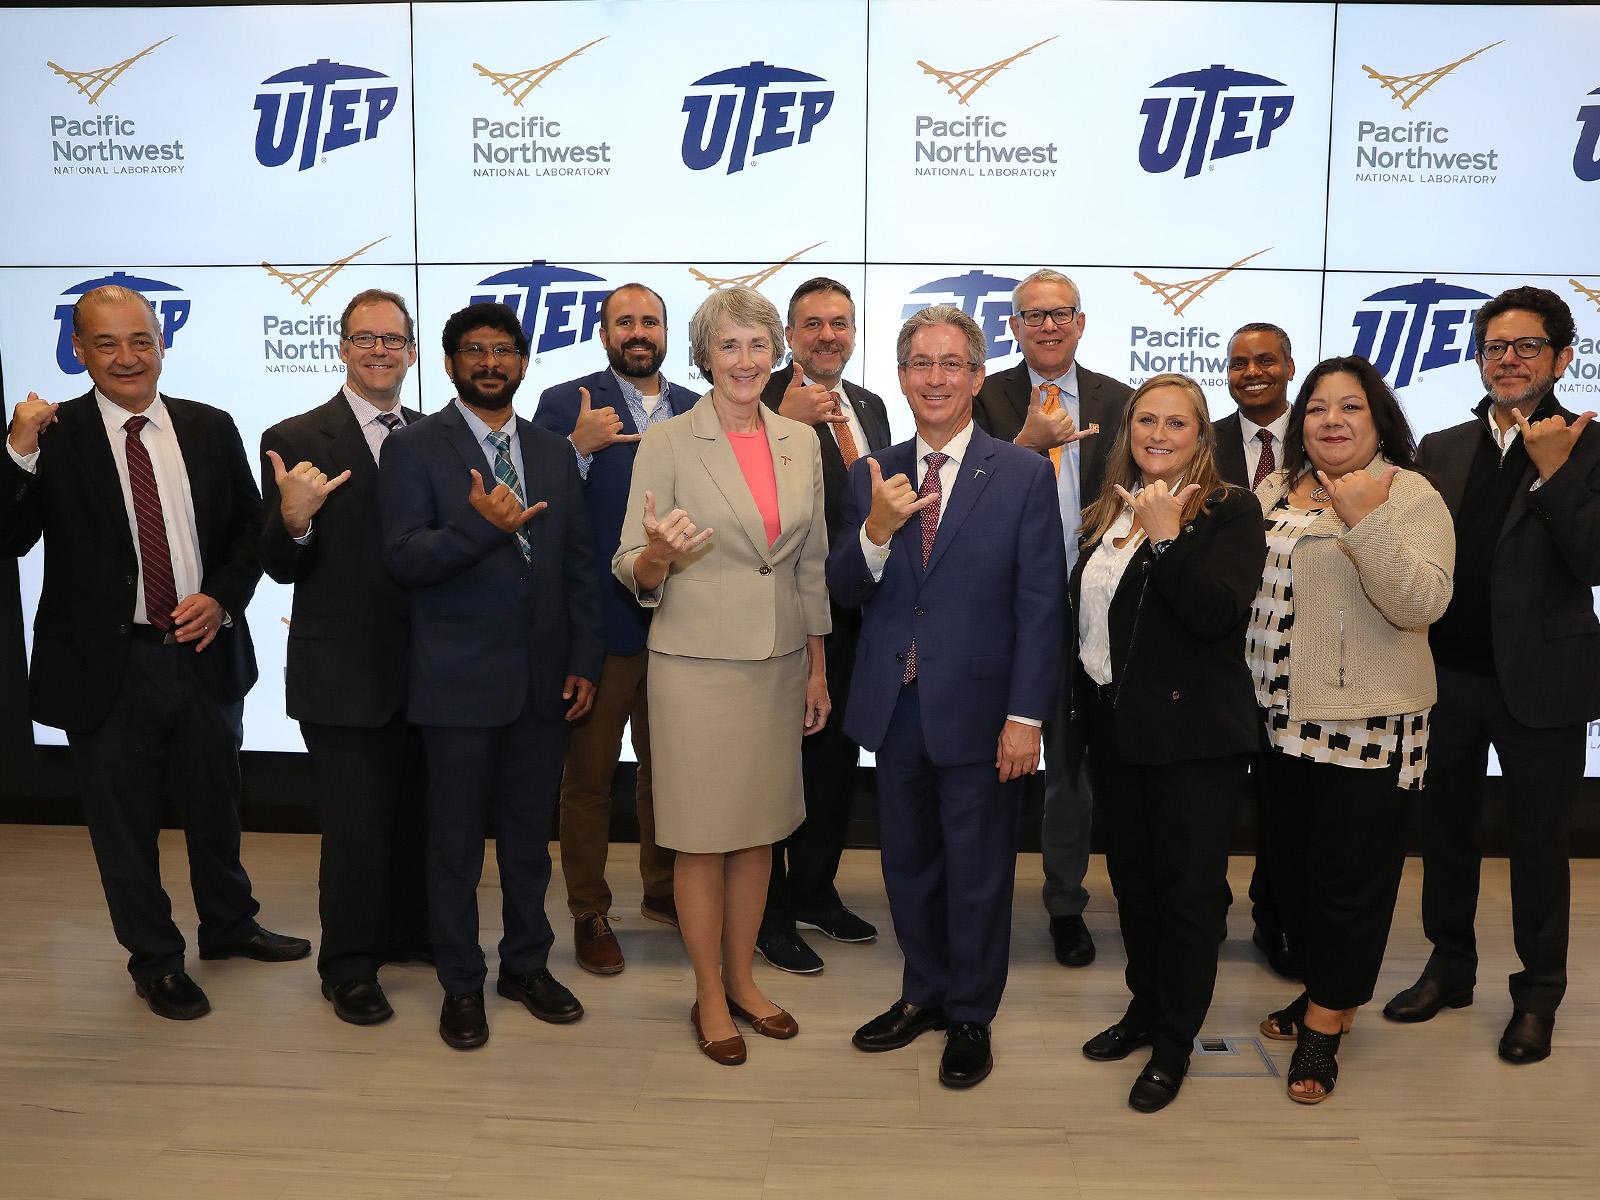 UTEP and PNNL sign an MOU on October 6, 2022